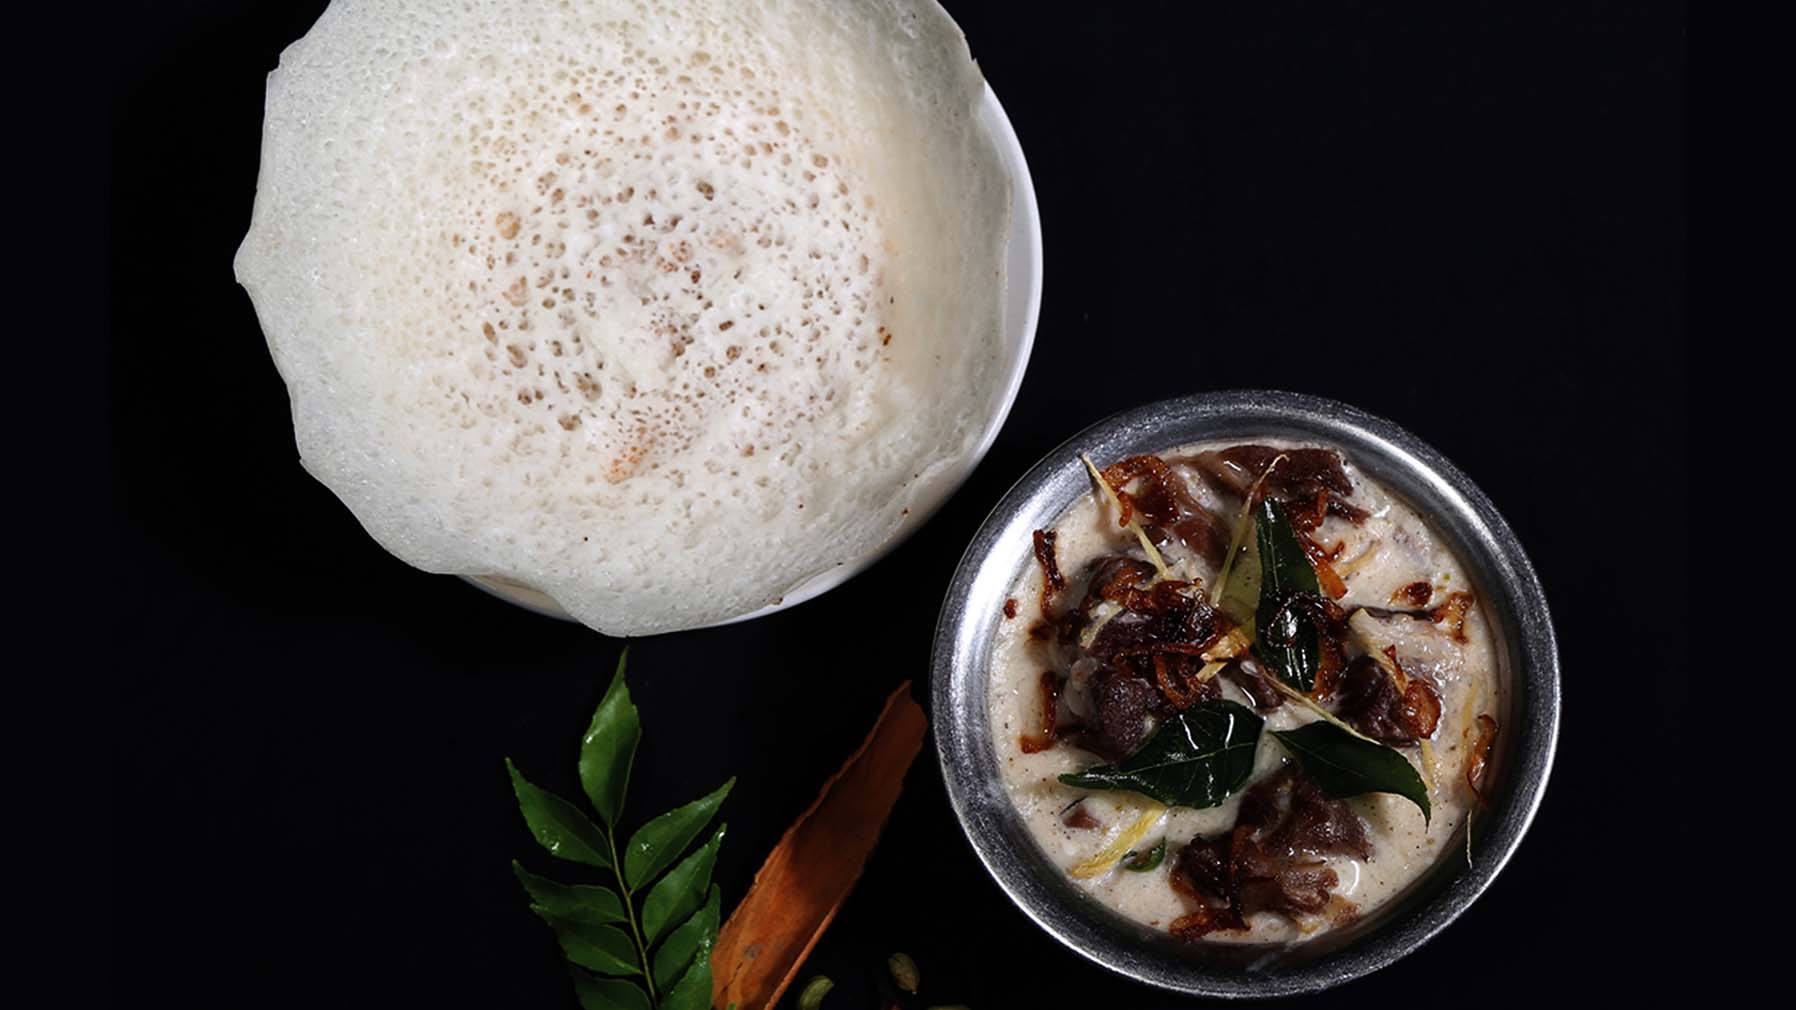 Best selling south indian food combo at tamarind- mutton stew and appam